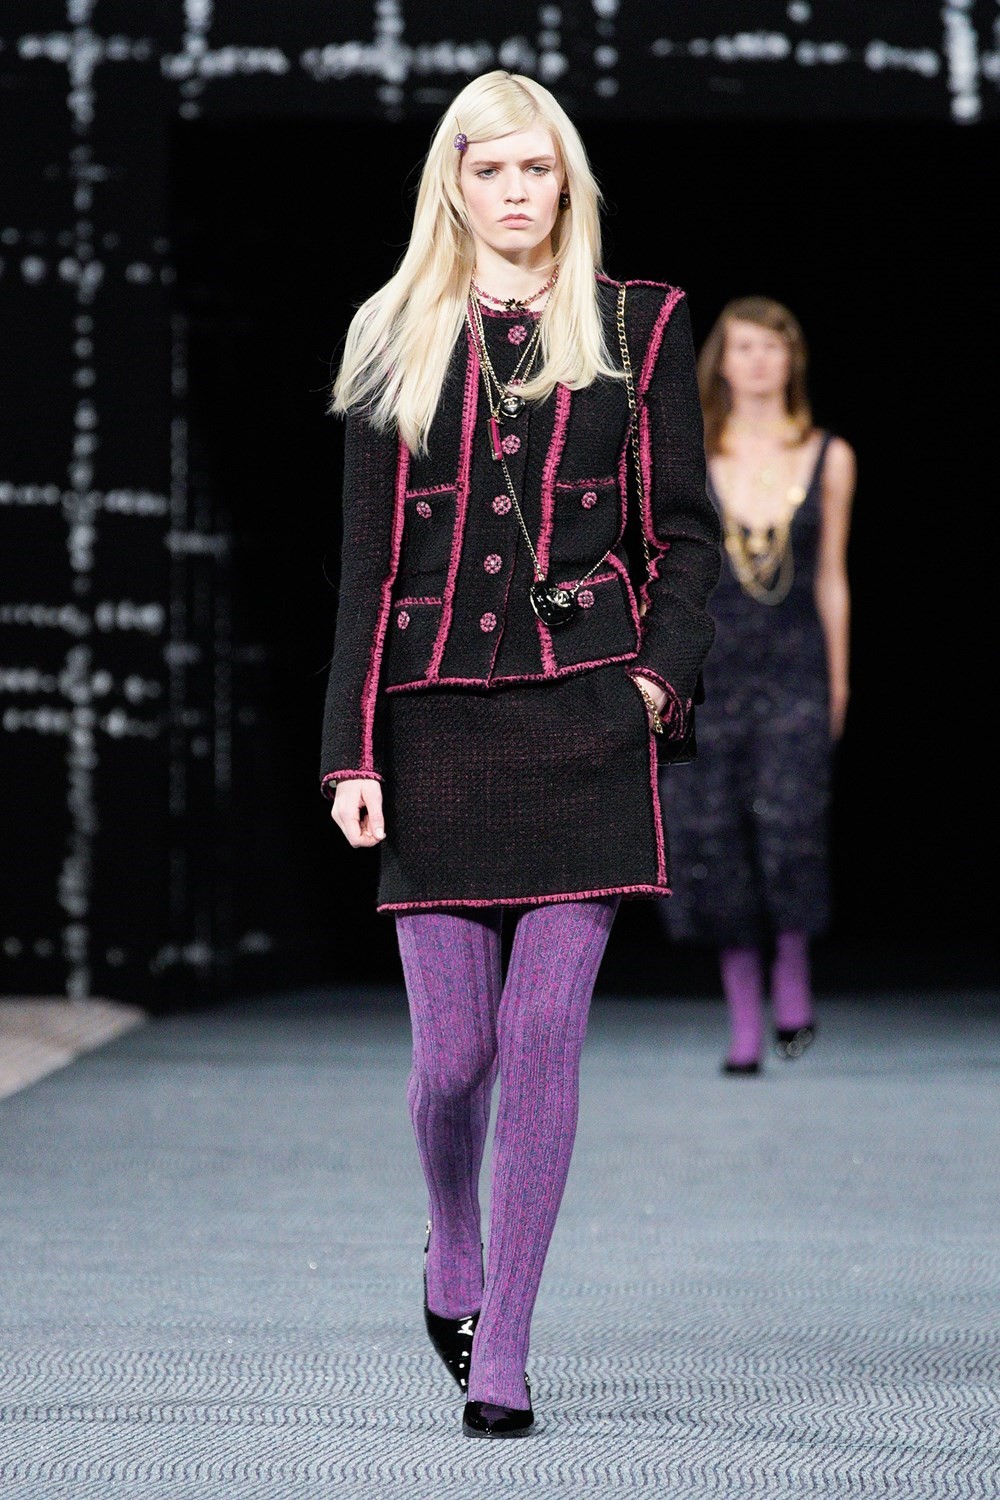 The White Tights Trend Just Showed Up on the Chanel Runway